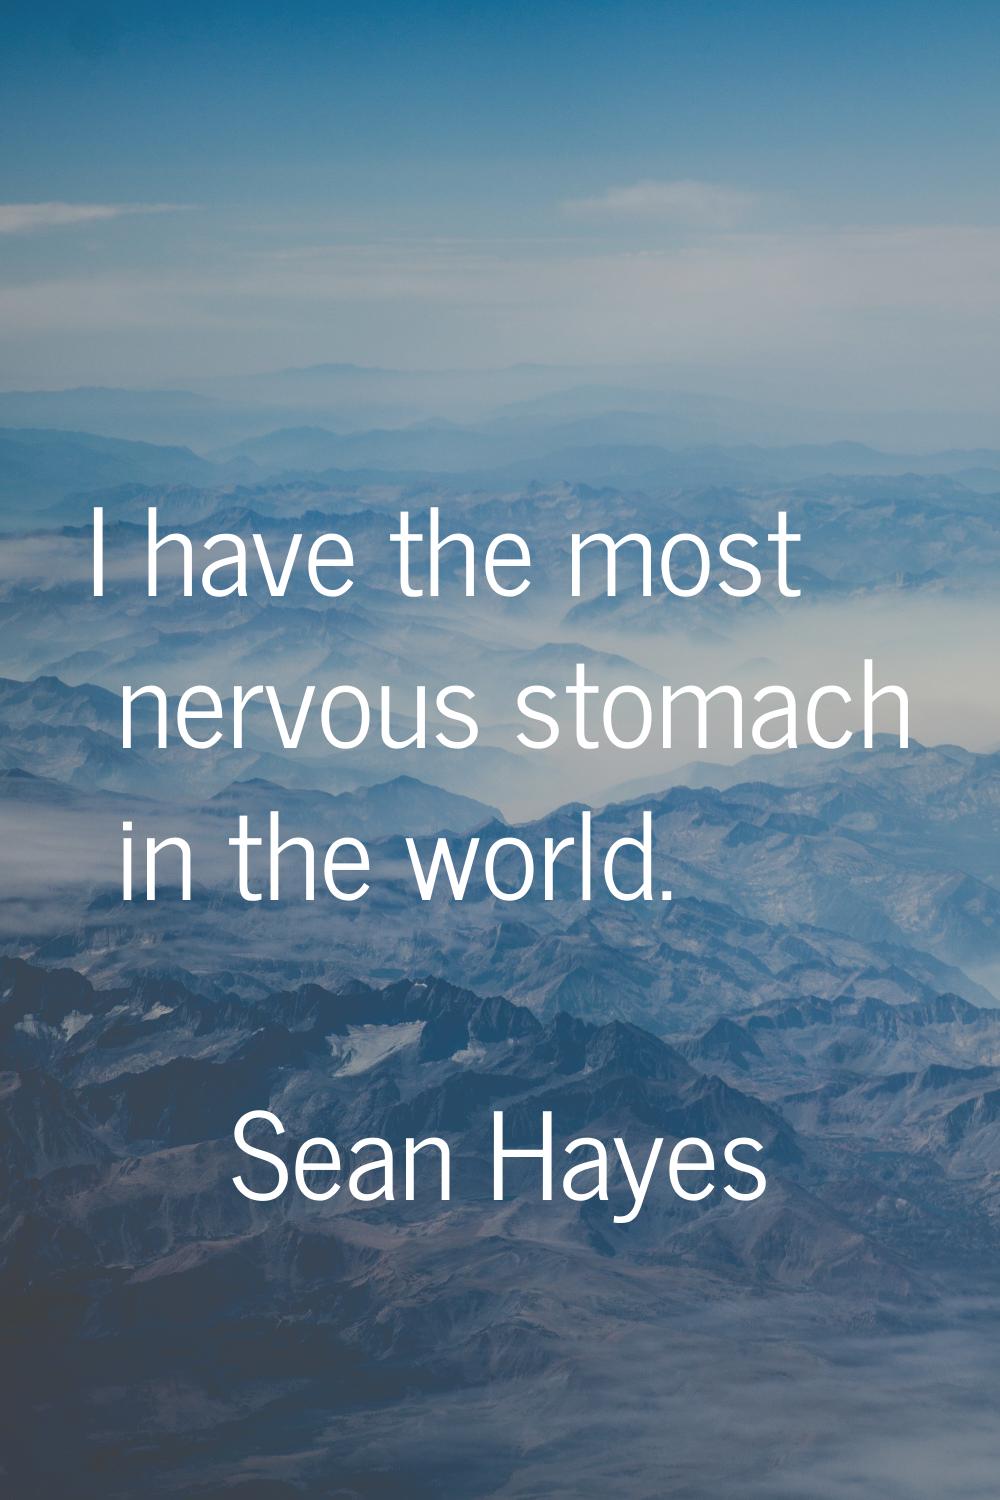 I have the most nervous stomach in the world.